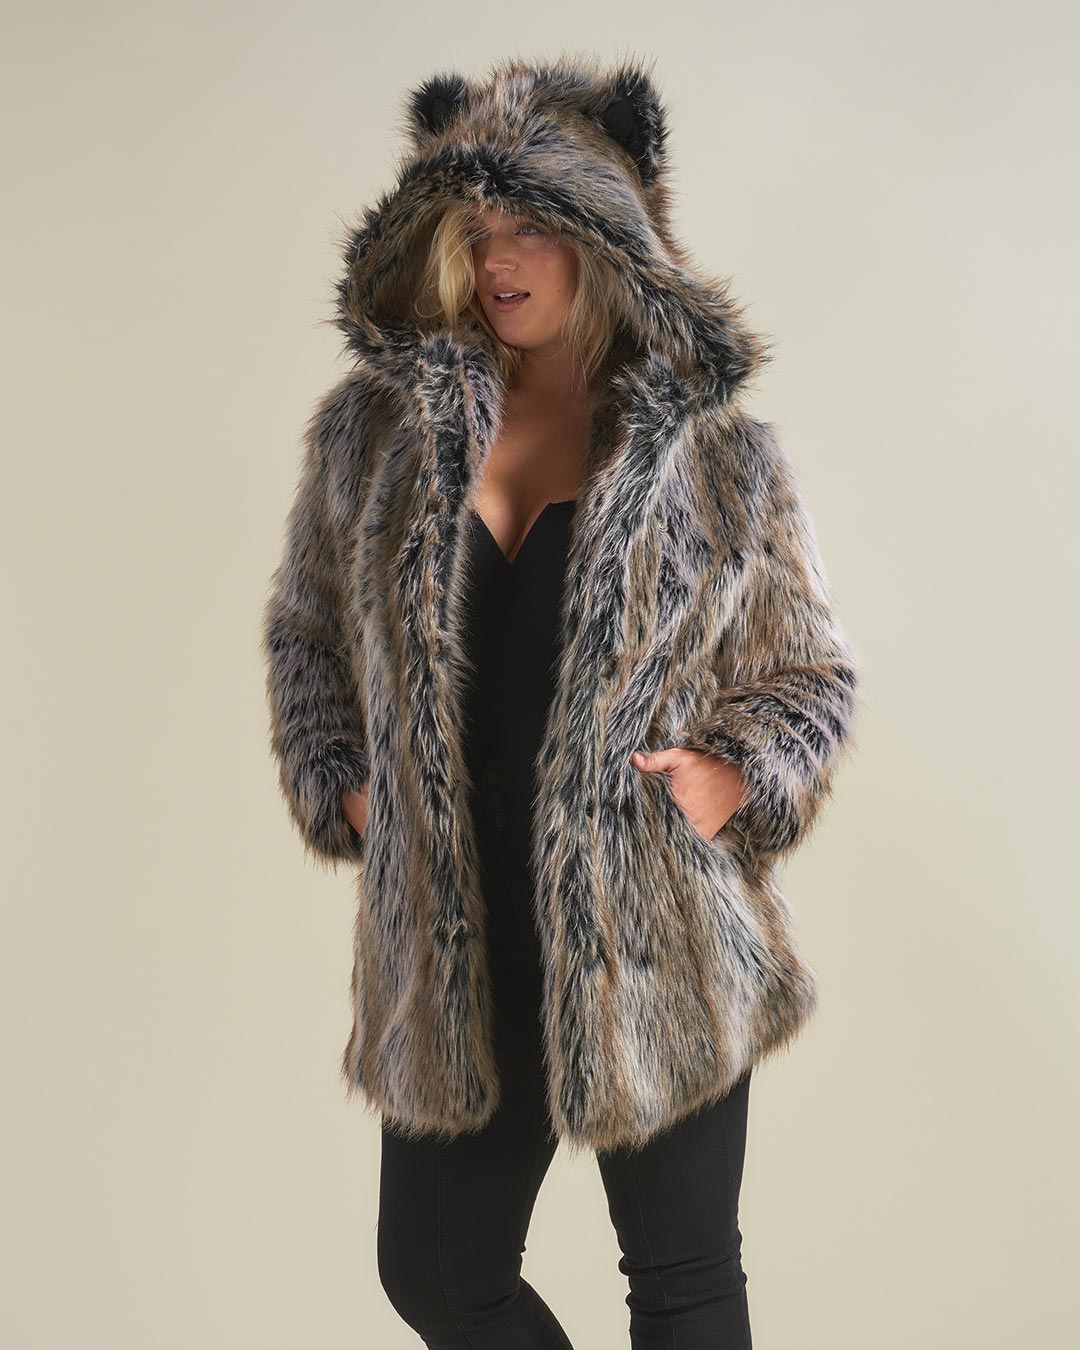 Blonde woman wearing Faux Fur Coat by SpiritHoods. Both her hands are in the coat pockets.